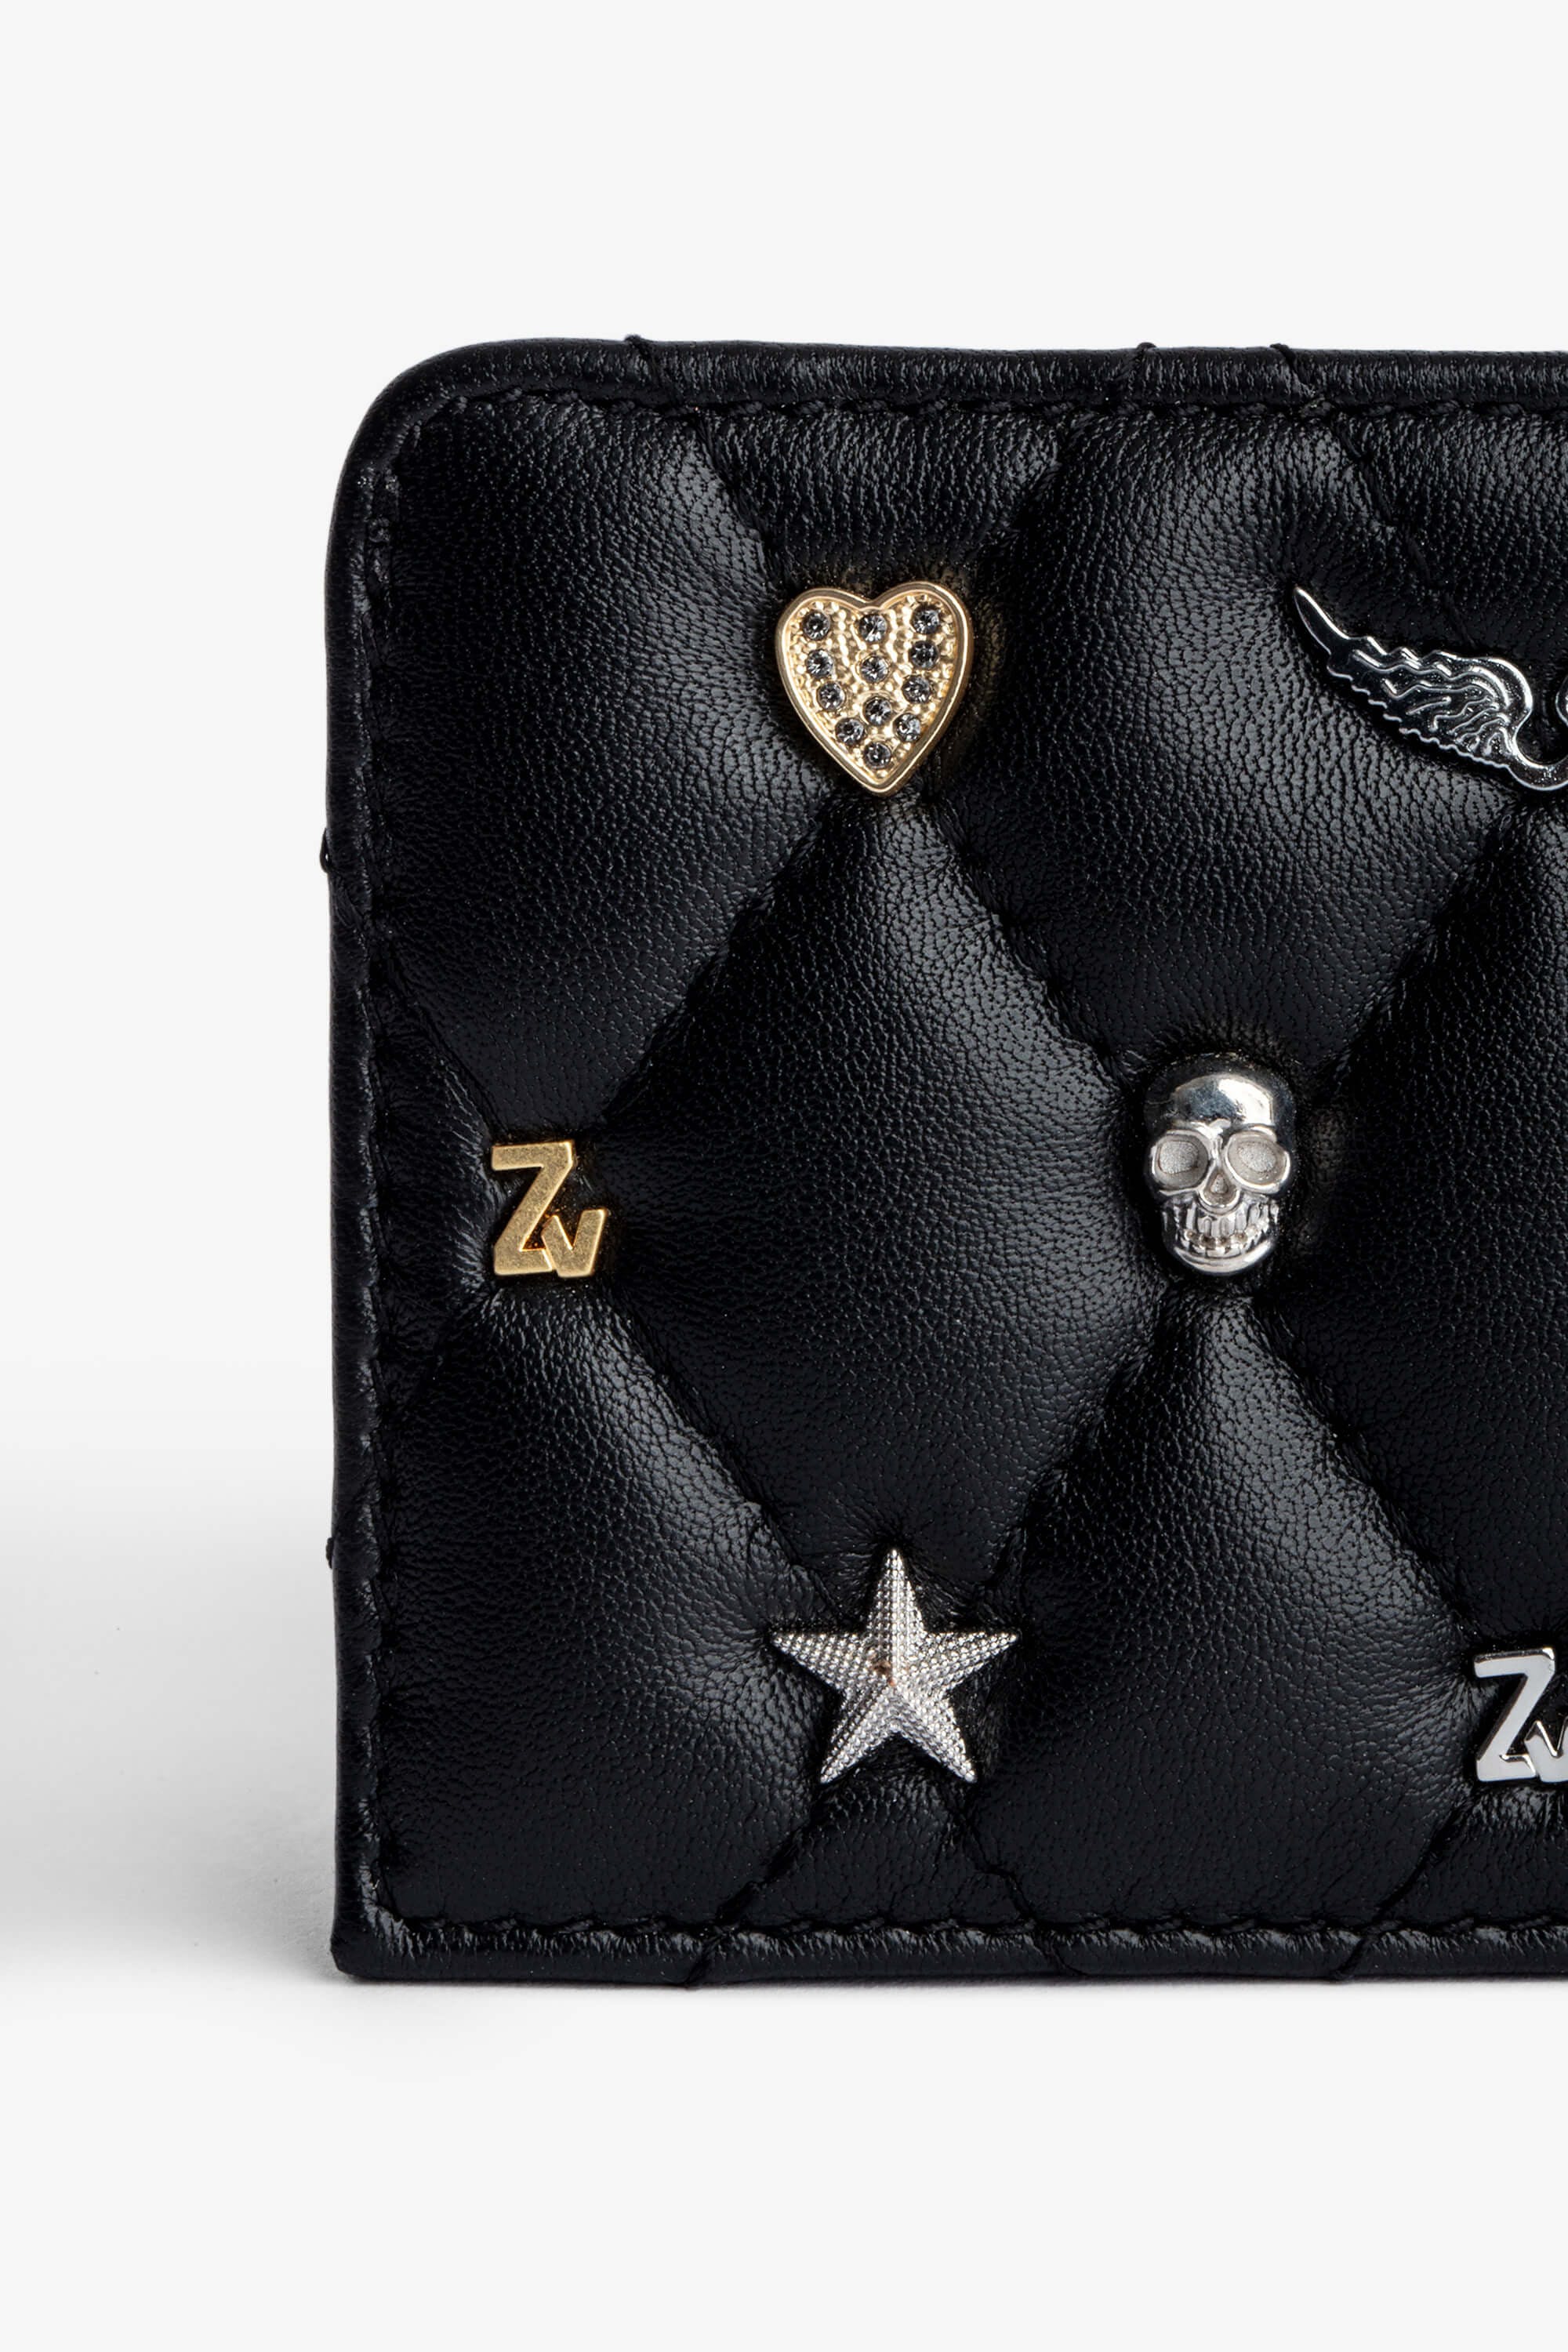 ZV Pass Charms Card Holder